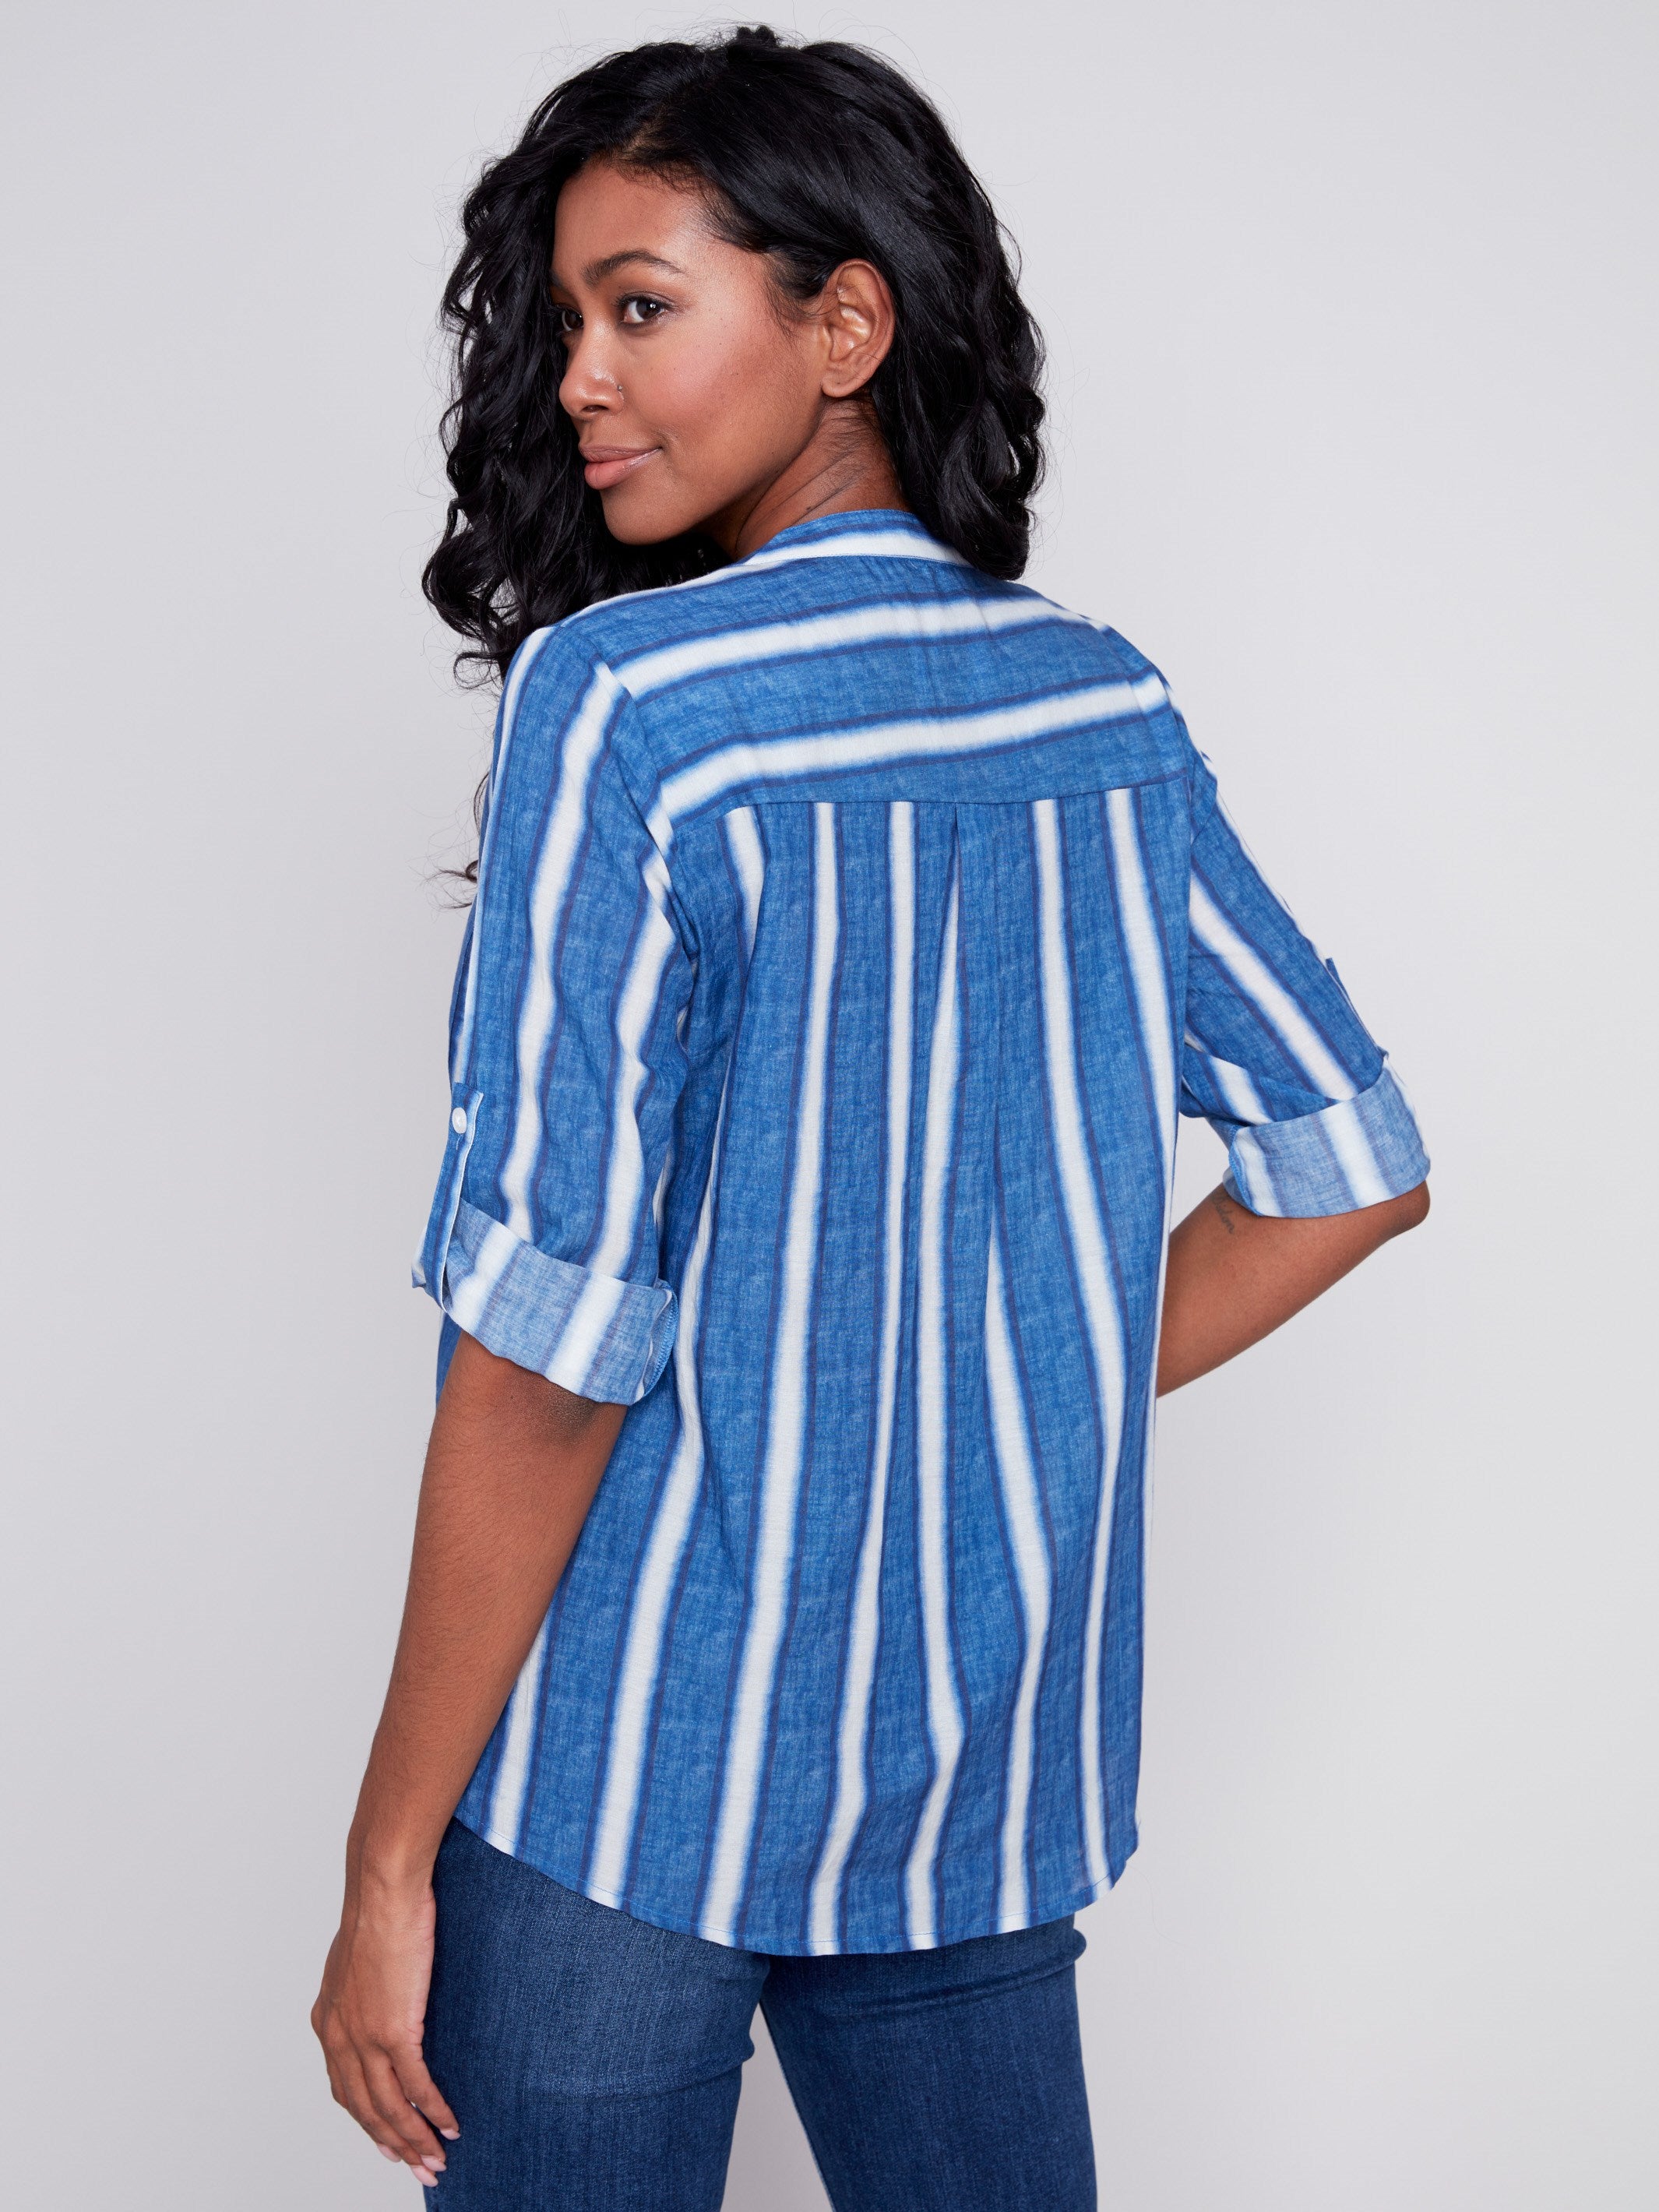 Printed Half-Button Blouse - Stripes - Charlie B Collection Canada - Image 2